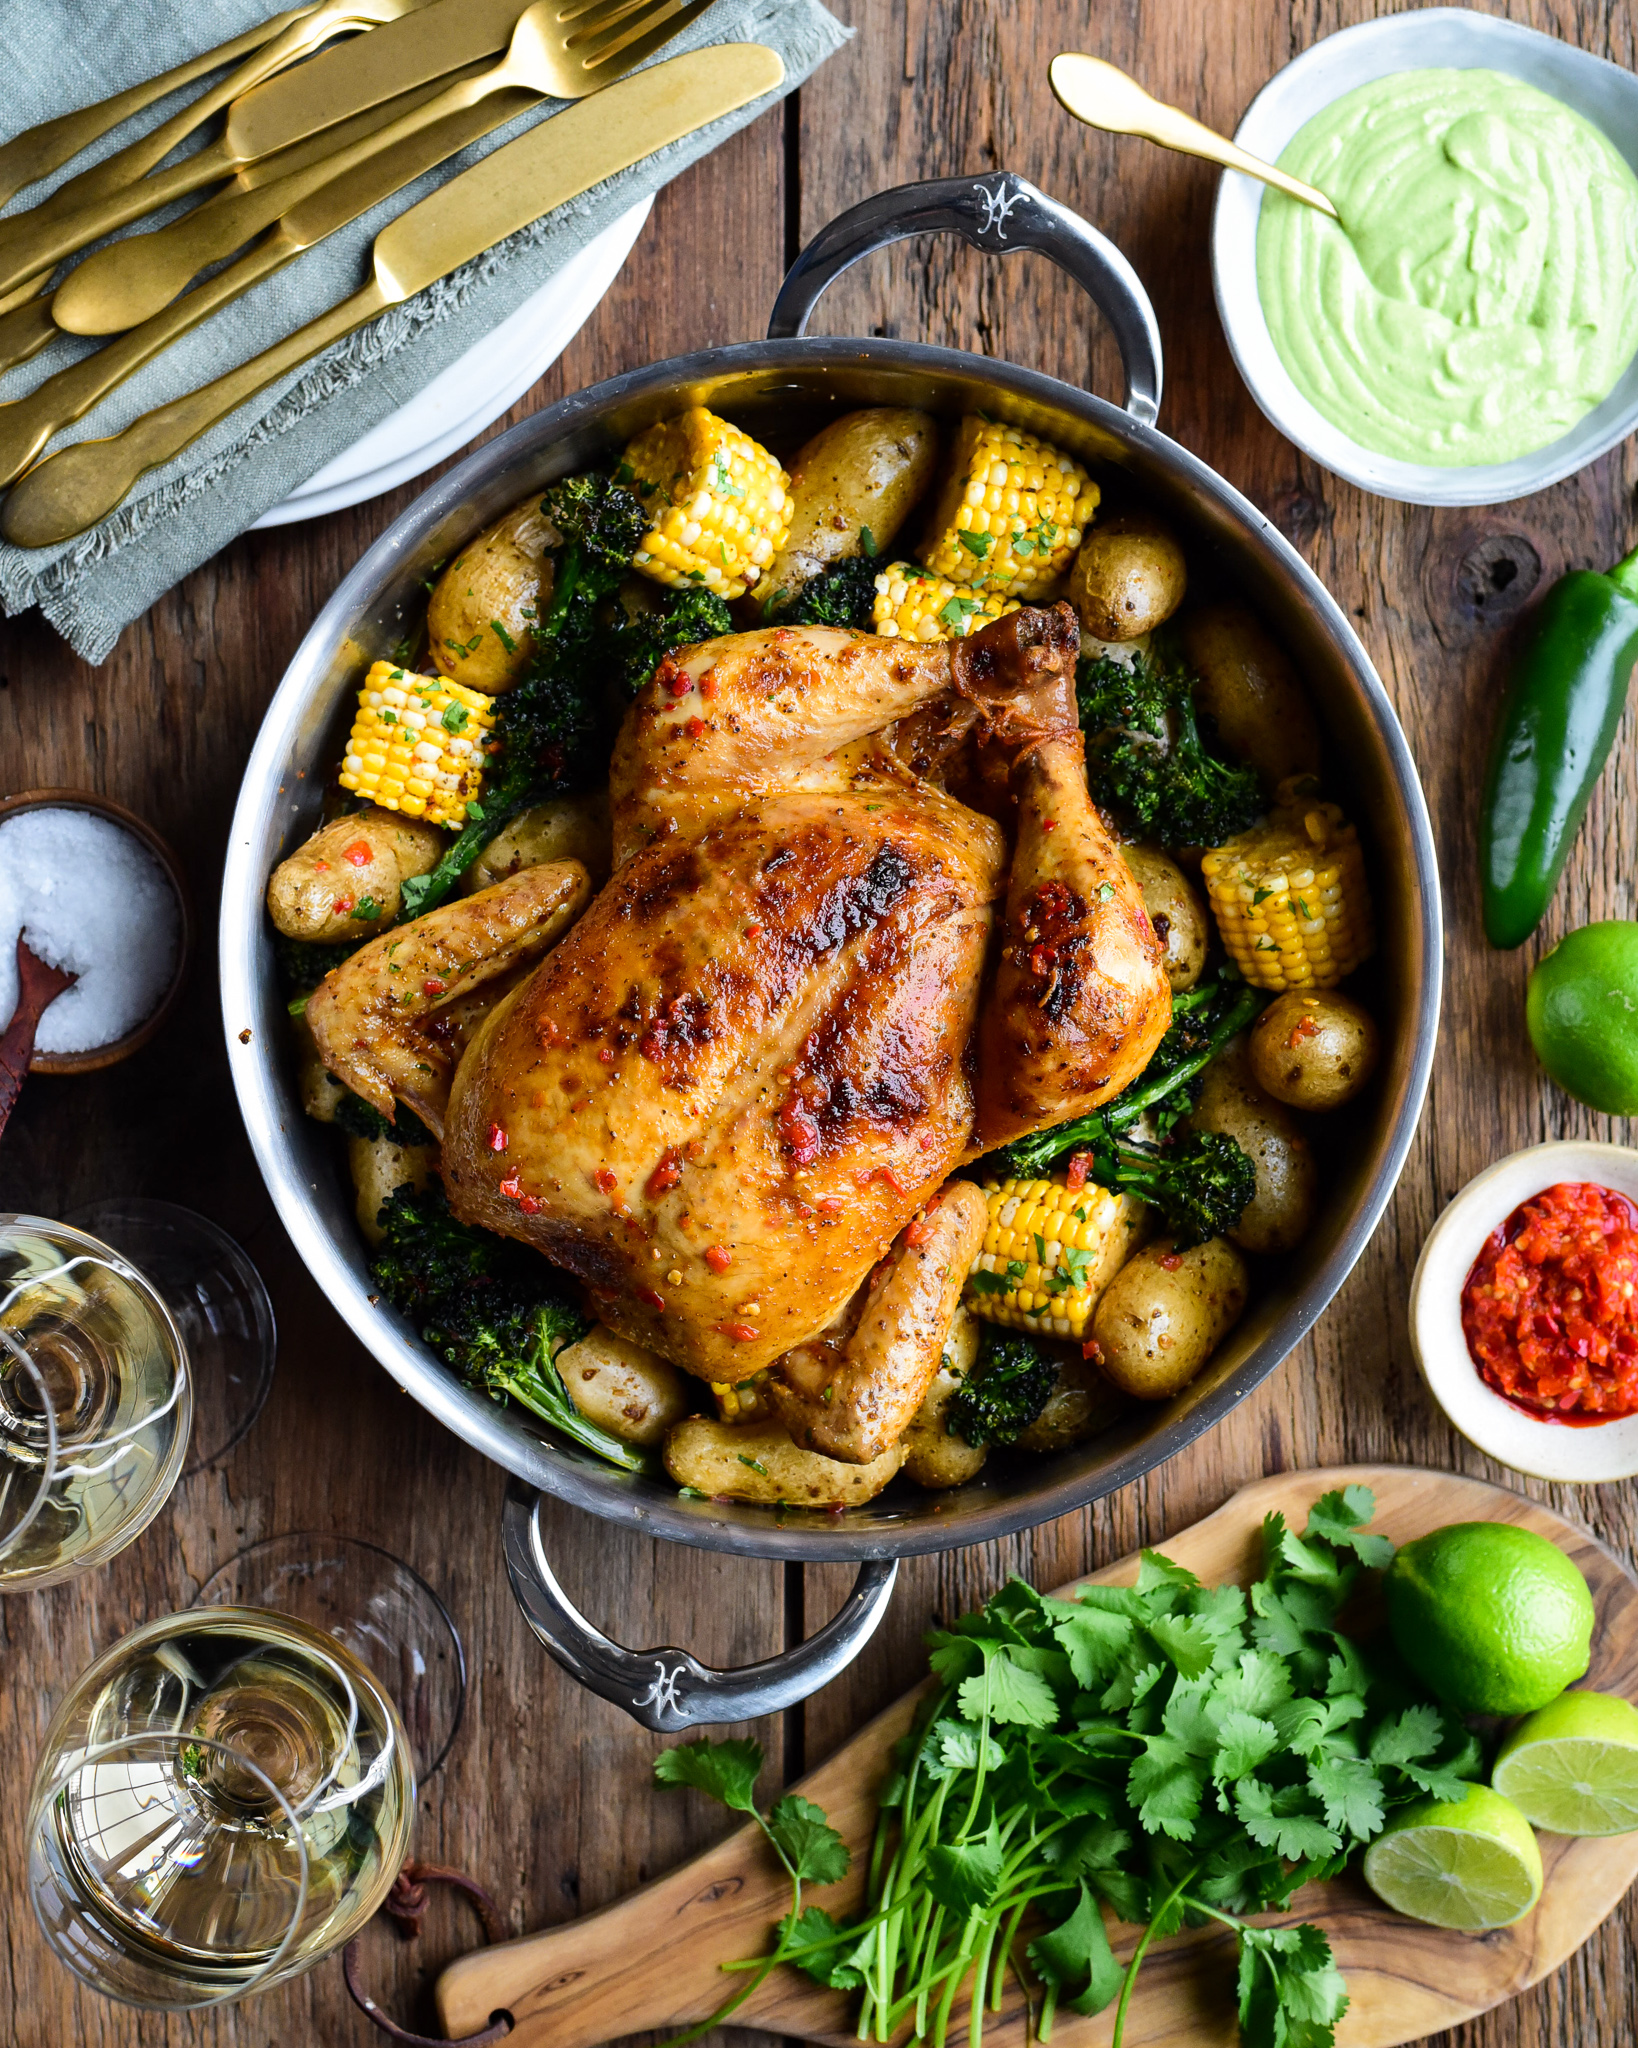 Top down image of a roasted chicken in a pan with roasted vegetables and bowl of green sauce.